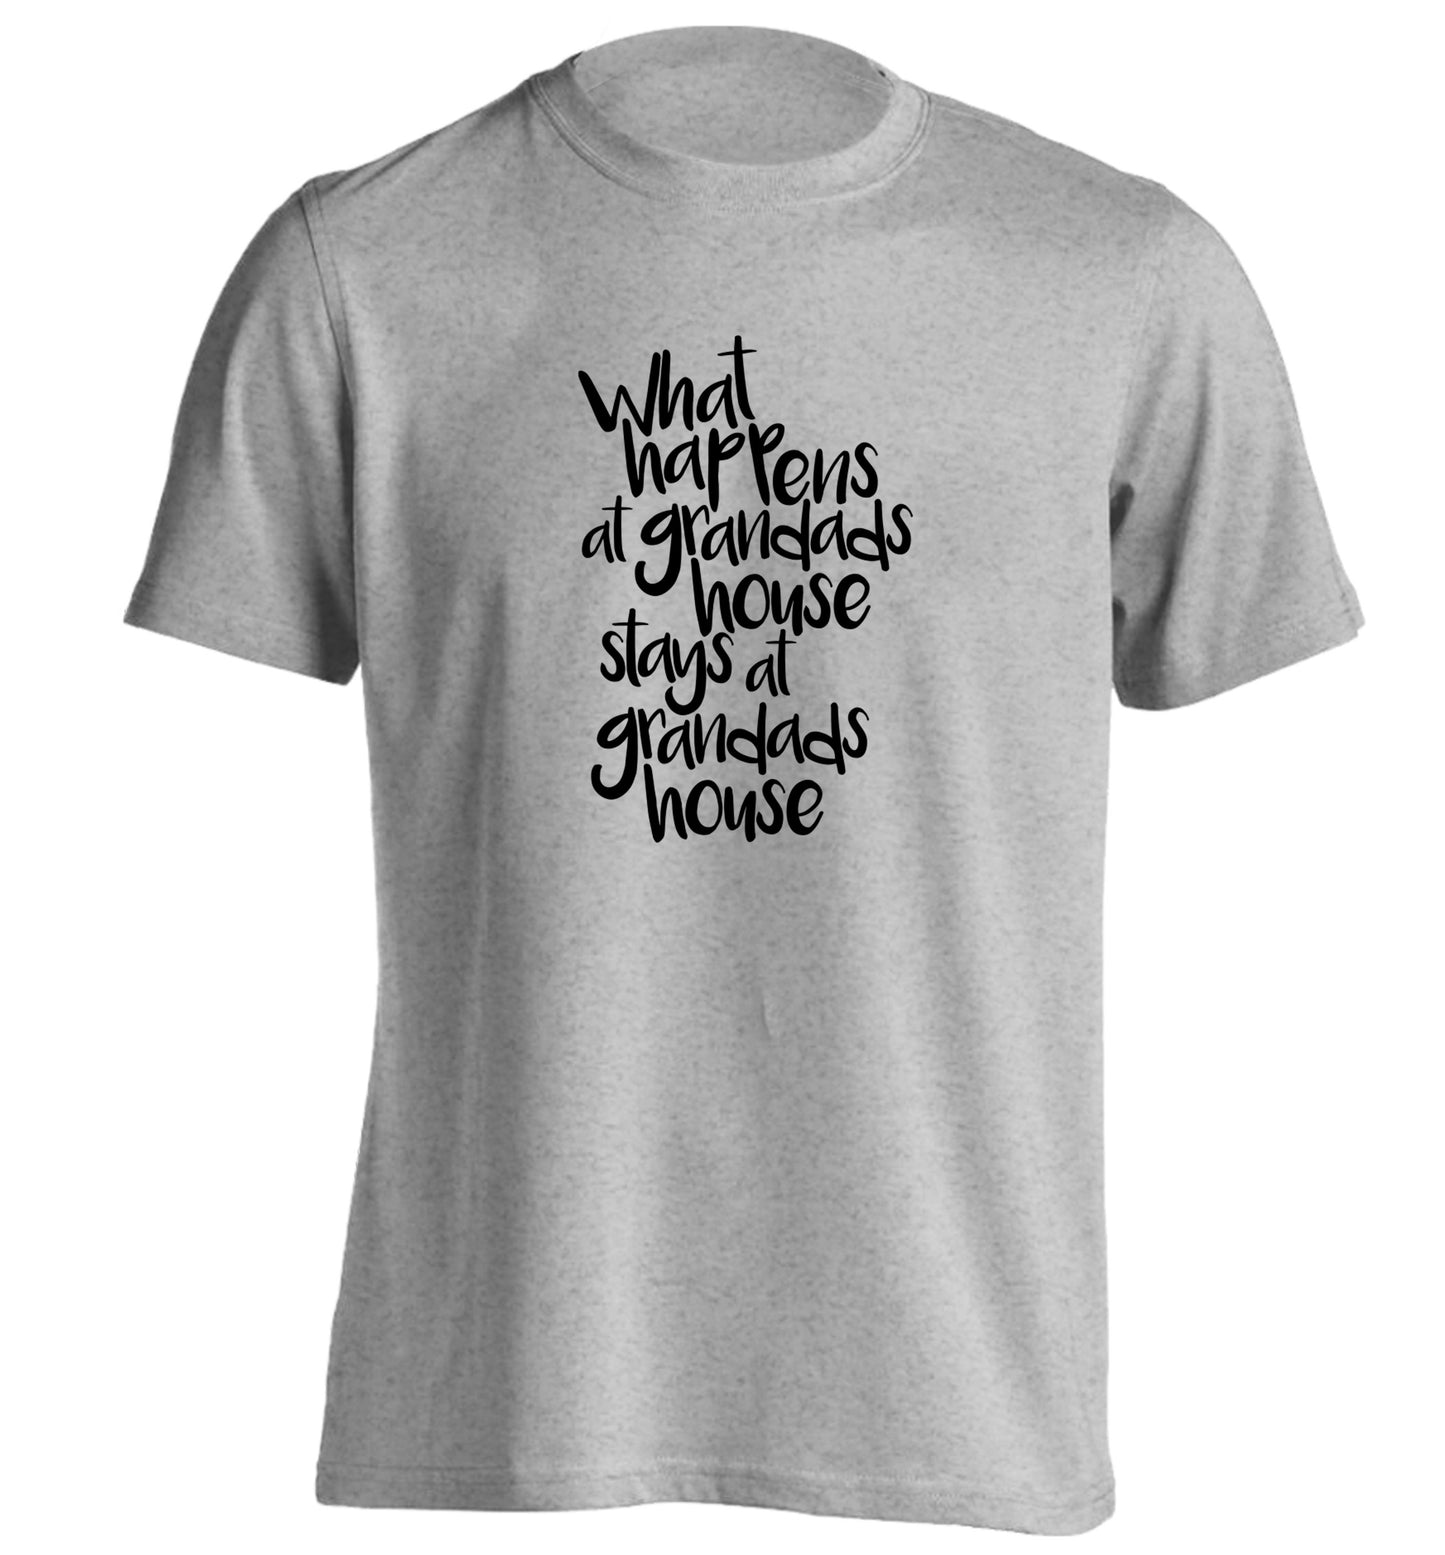 What happens at grandads house stays at grandads house adults unisex grey Tshirt 2XL